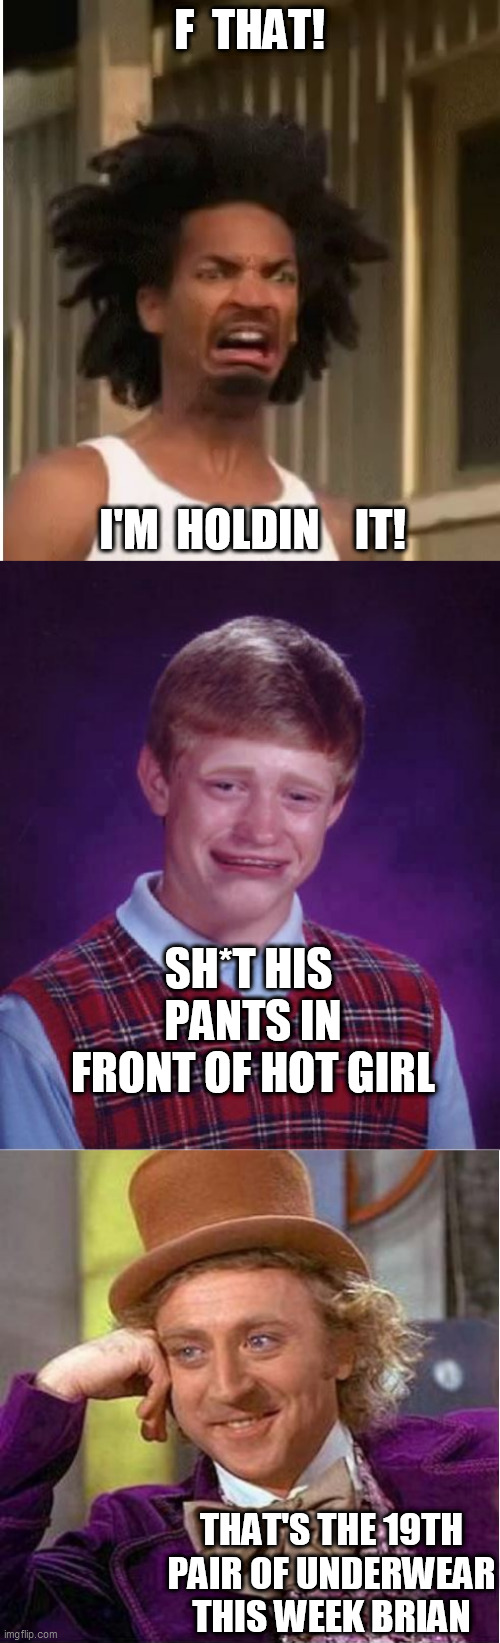 F  THAT! I'M  HOLDIN    IT! SH*T HIS  PANTS IN FRONT OF HOT GIRL THAT'S THE 19TH PAIR OF UNDERWEAR THIS WEEK BRIAN | made w/ Imgflip meme maker